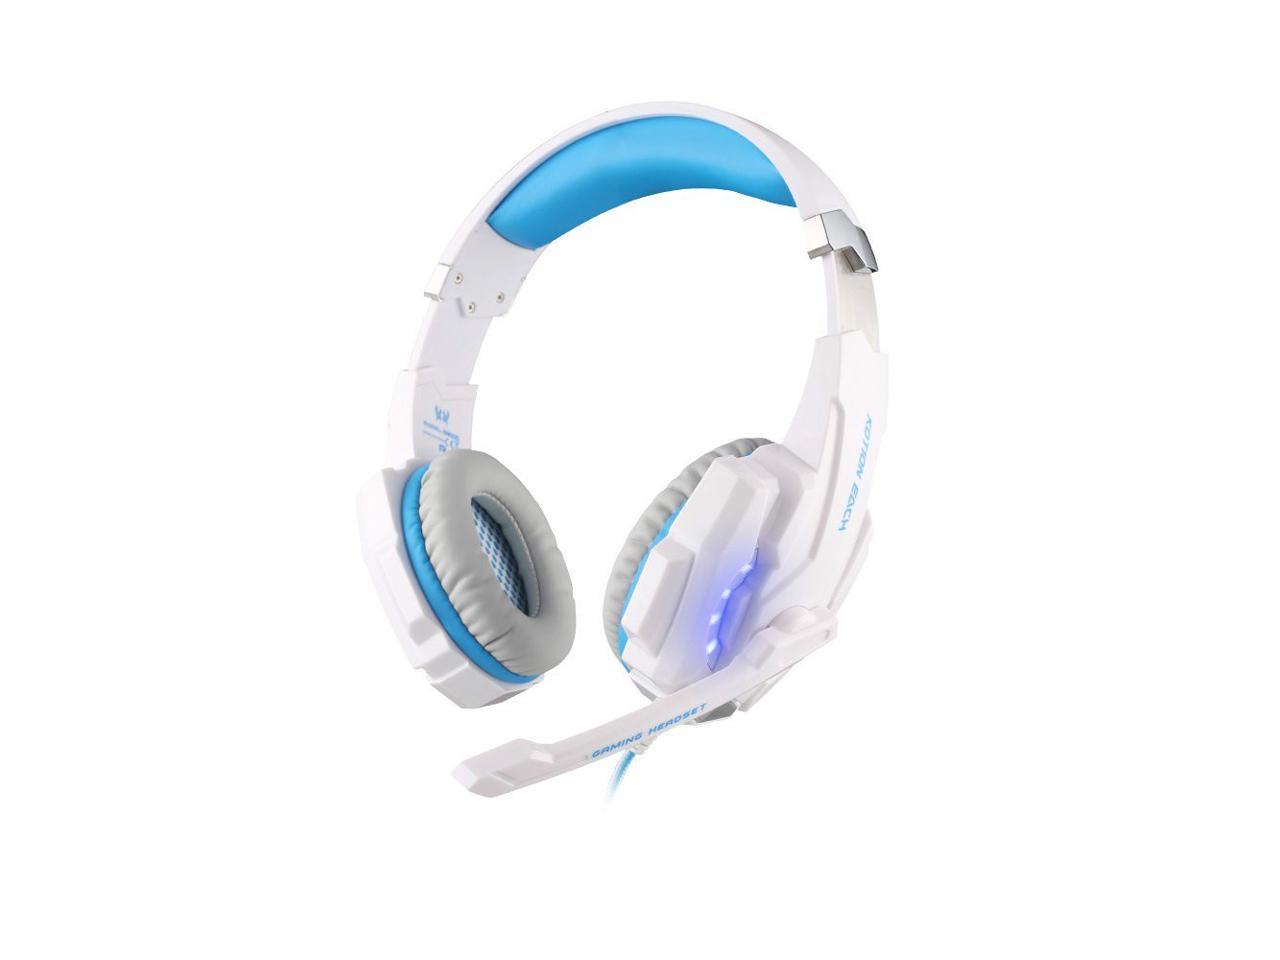 KOTION EACH G9000 USB Wired Led Gaming Headphones with Mic Auriculares Game Stereo Headset